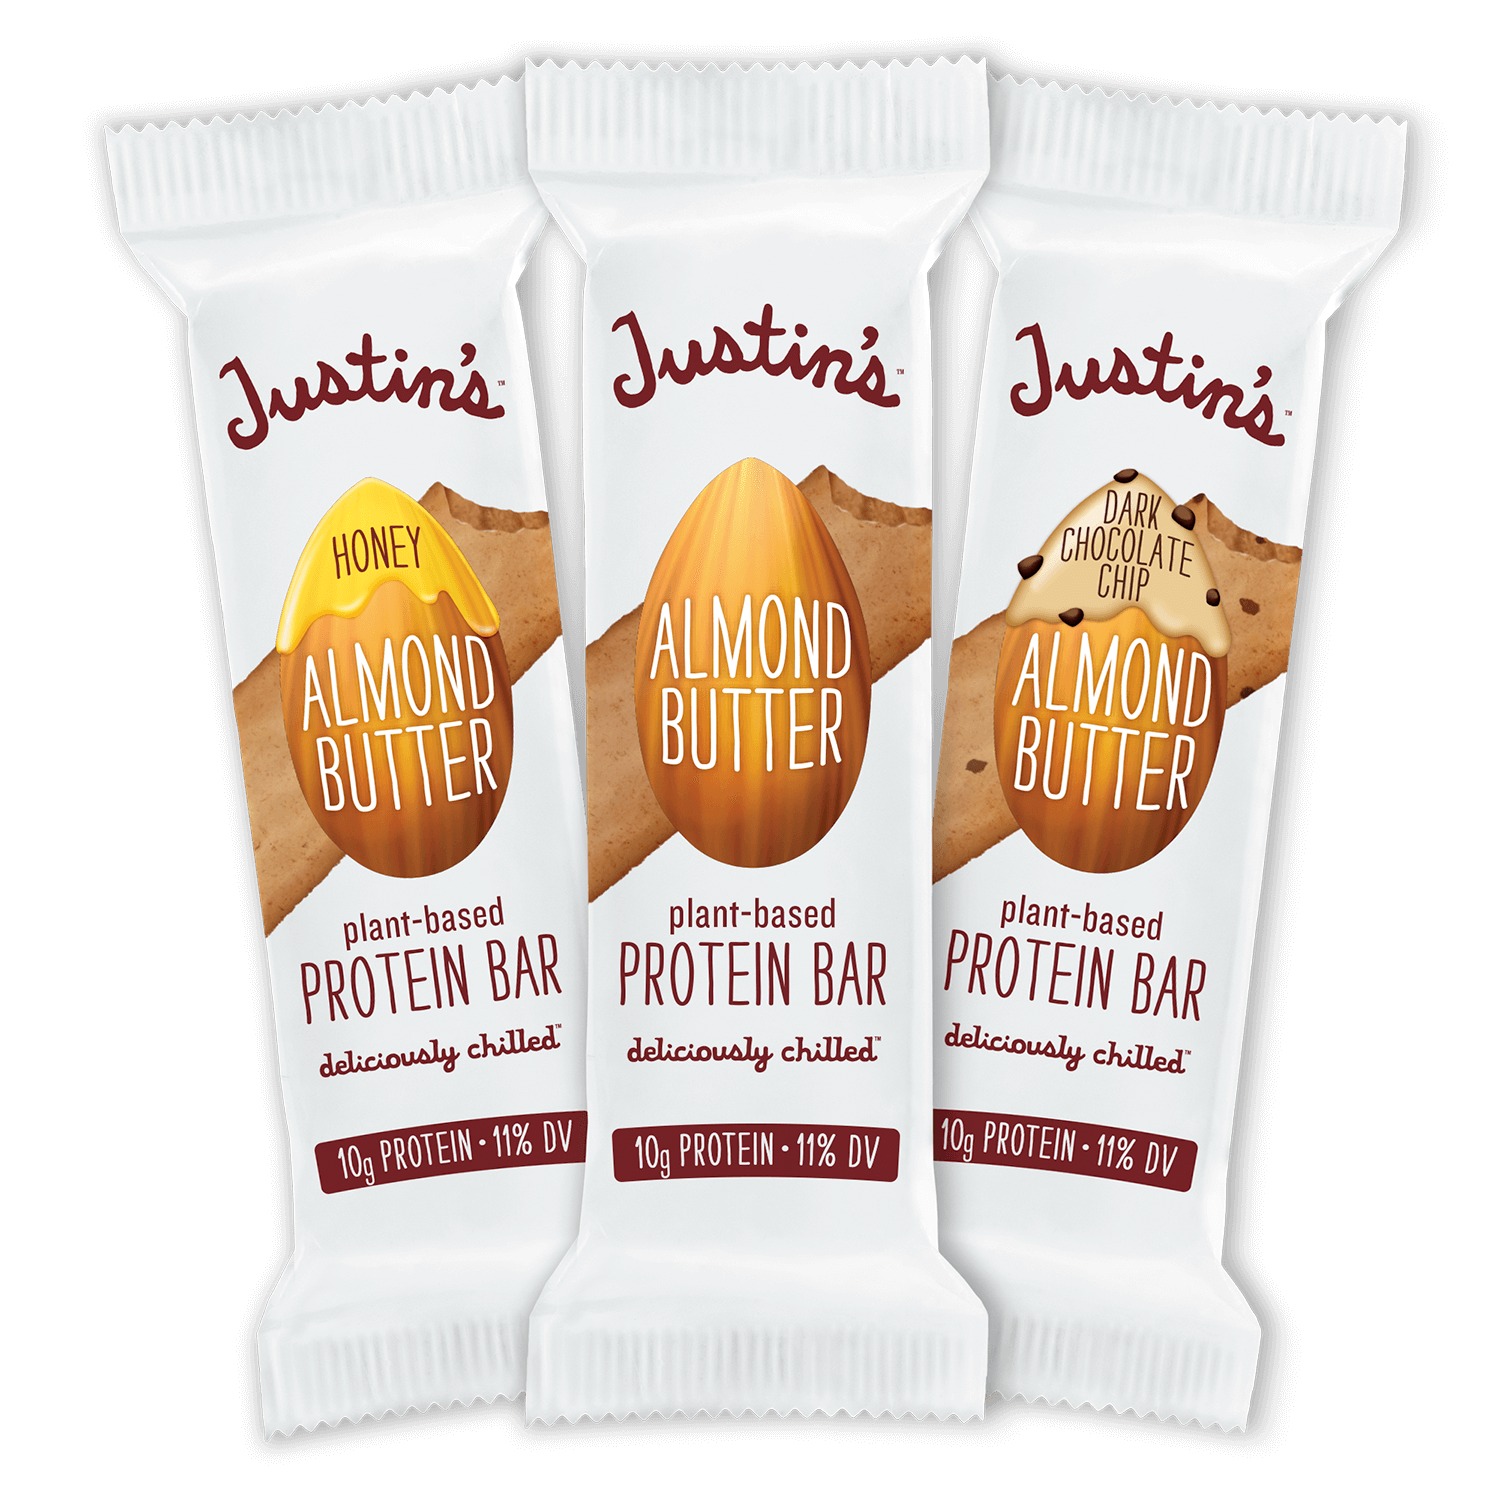 Line up of Justin's plant-based Protein Bar in Honey Almond Butter, Almond Butter, and Dark Chocolate Chip Almond Butter